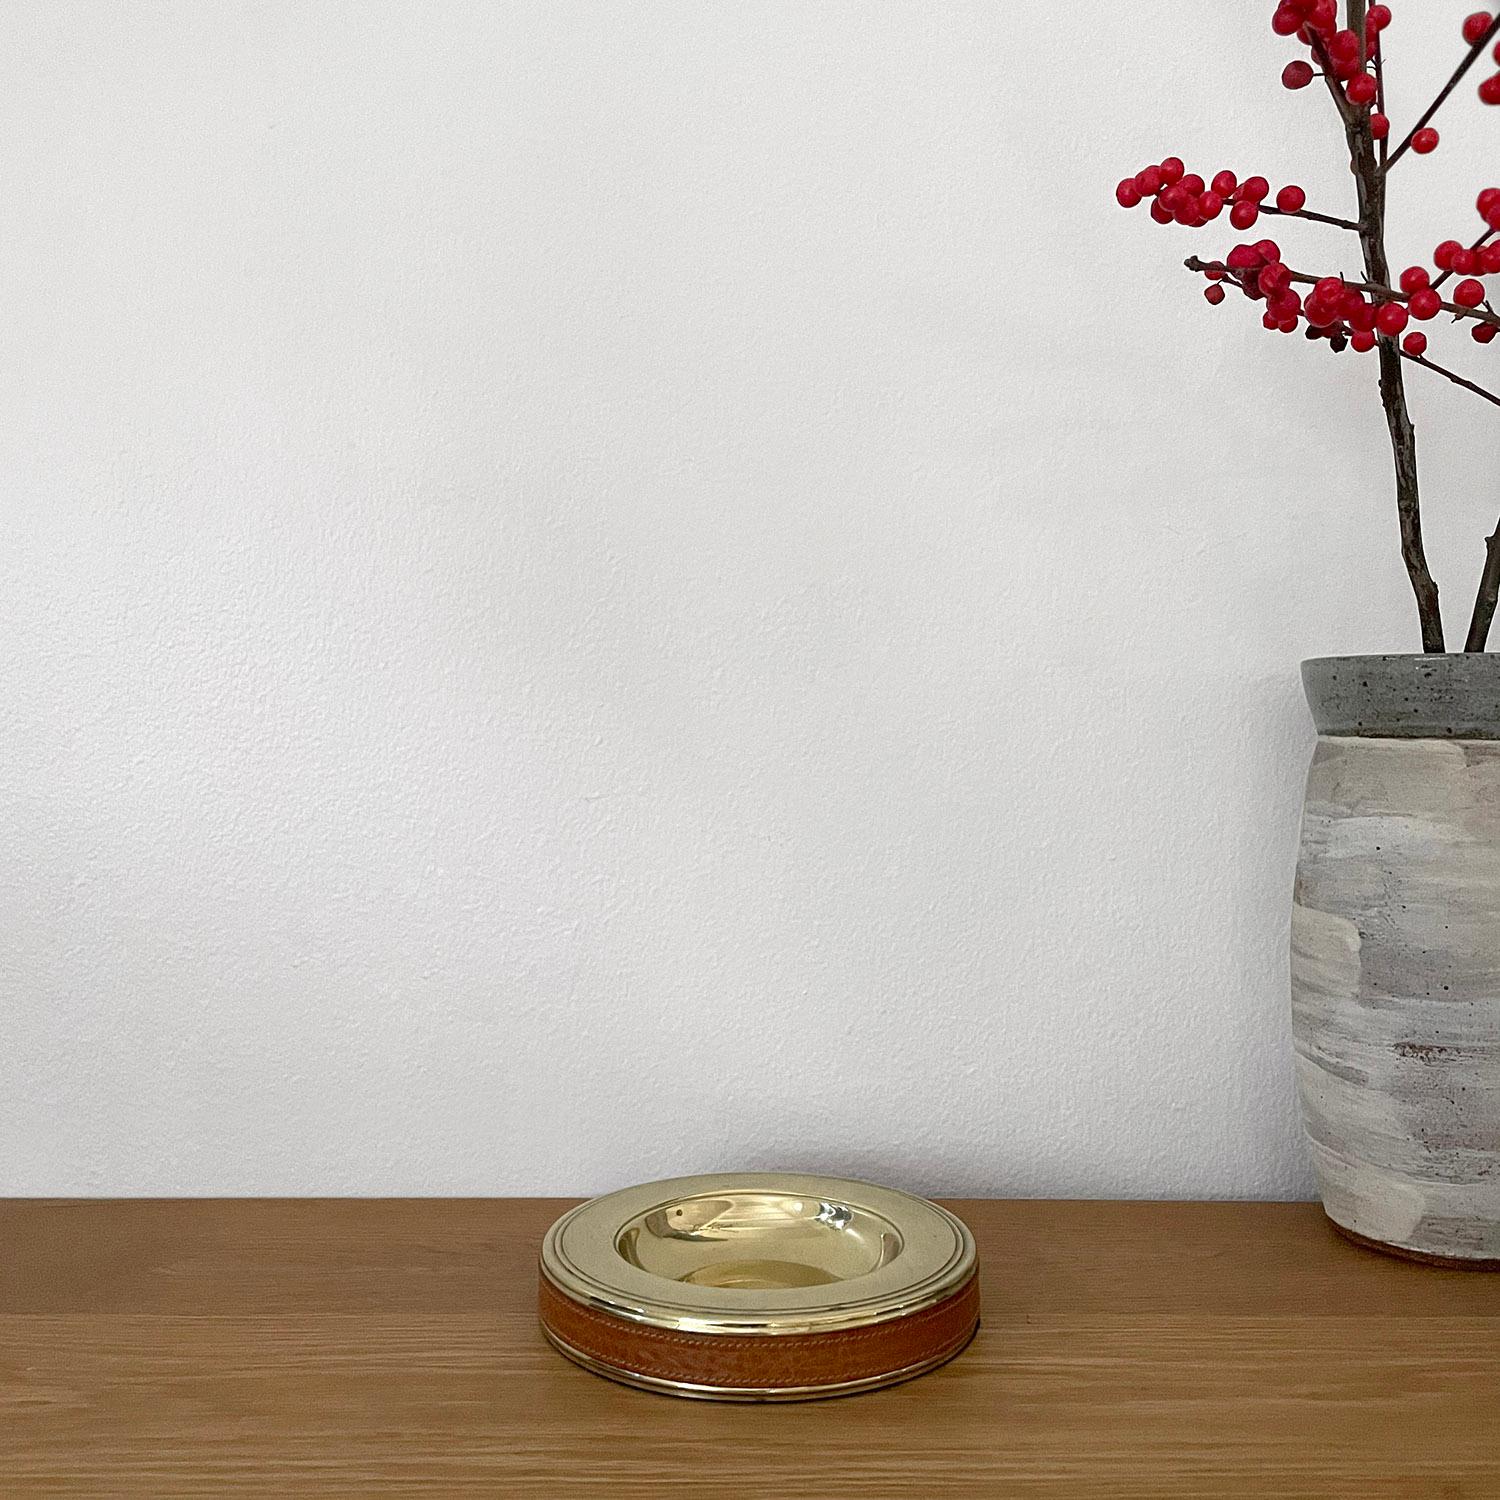 Mid-20th Century Italian Mid Century Aged Brass & Leather Catchall Ashtray For Sale